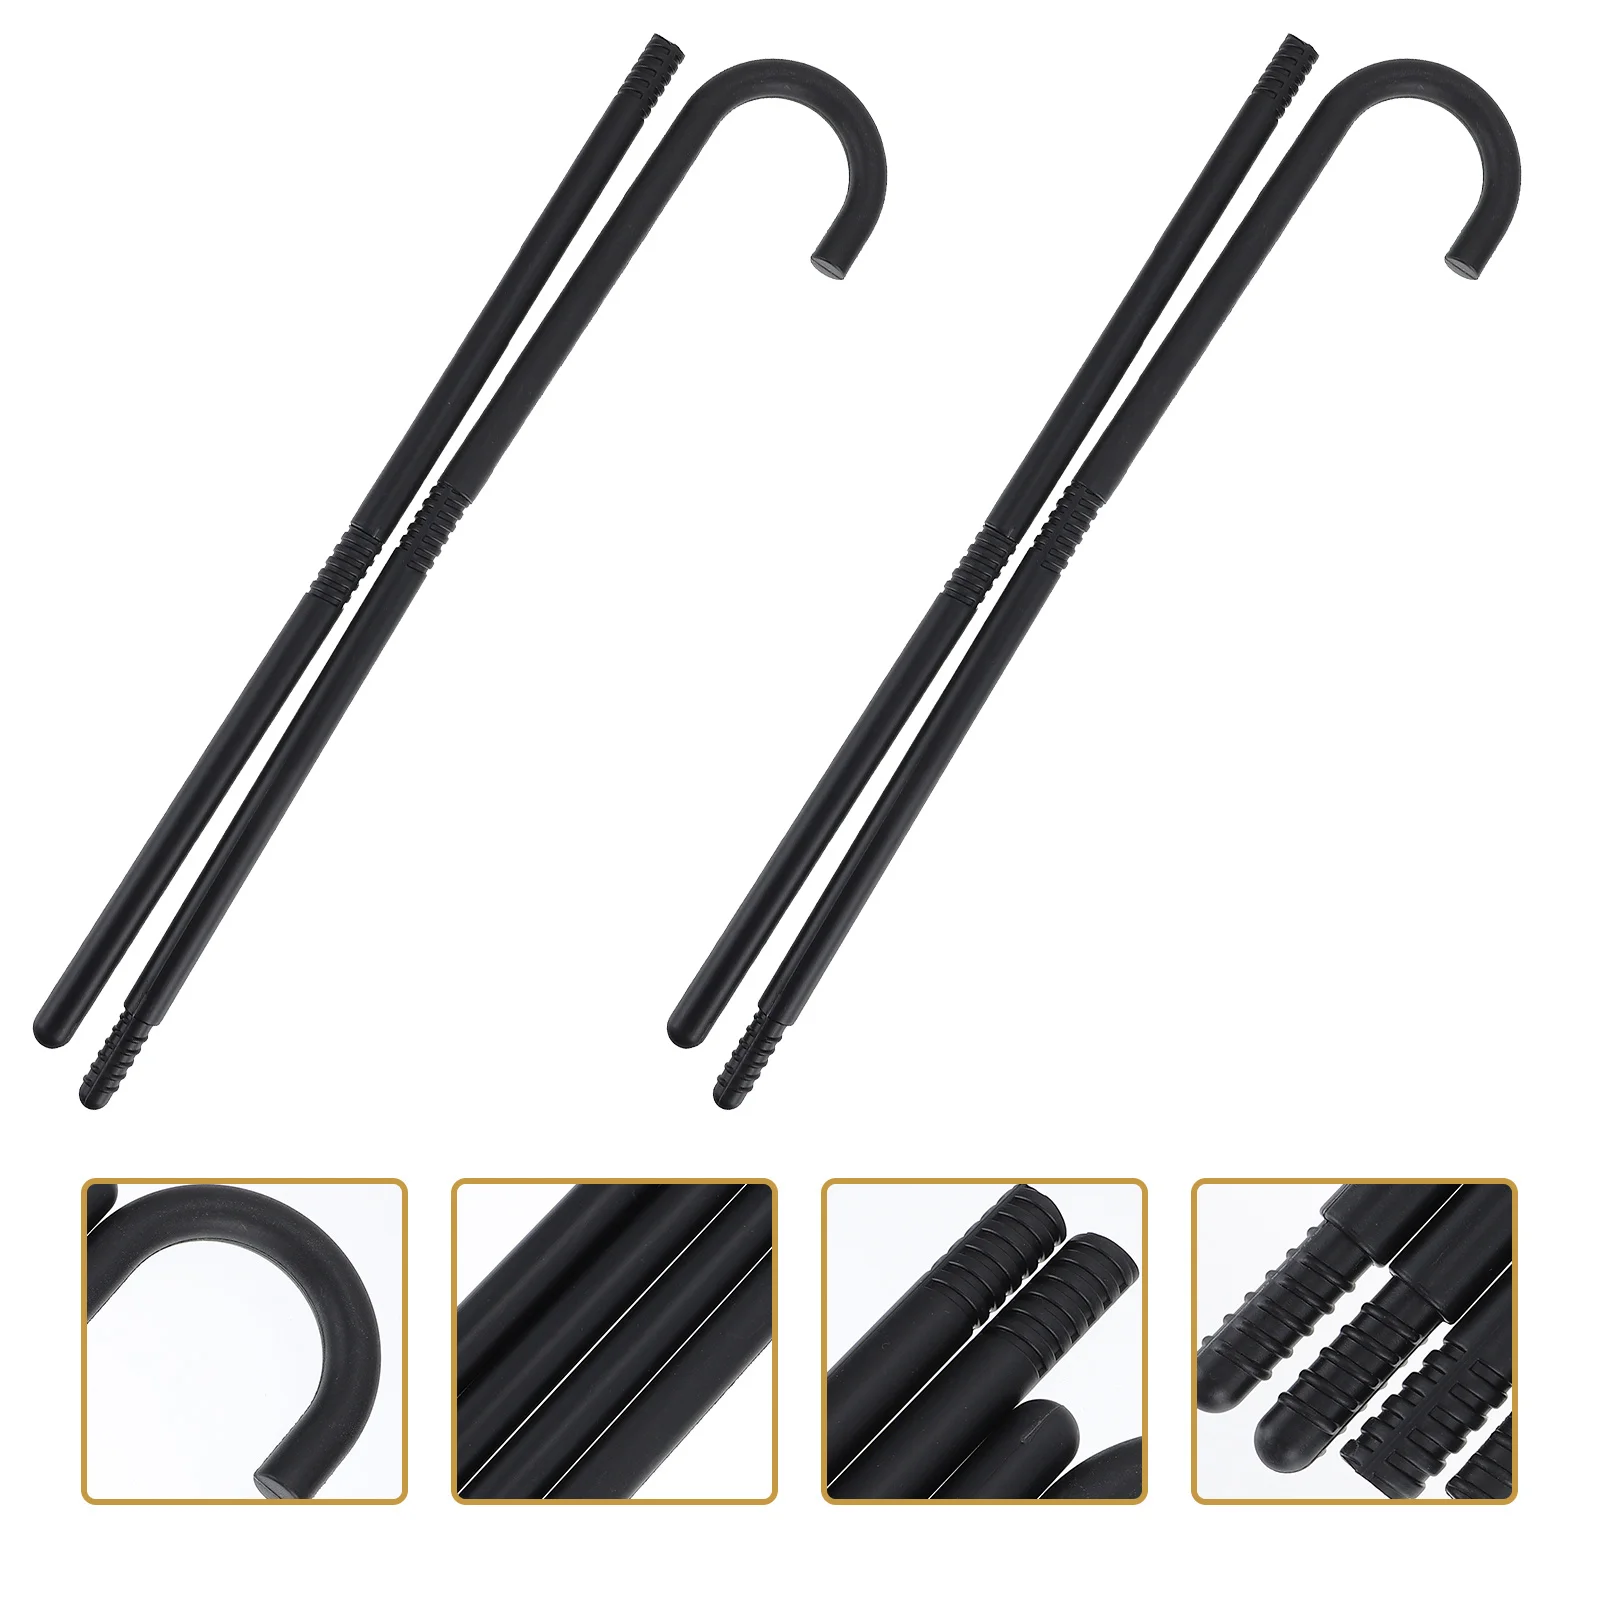 

2 Pcs Crutches Adults Party Props Halloween Wands Kids Performance 100XX1.8X1.8CM Trick Gifts Black Plastic Work